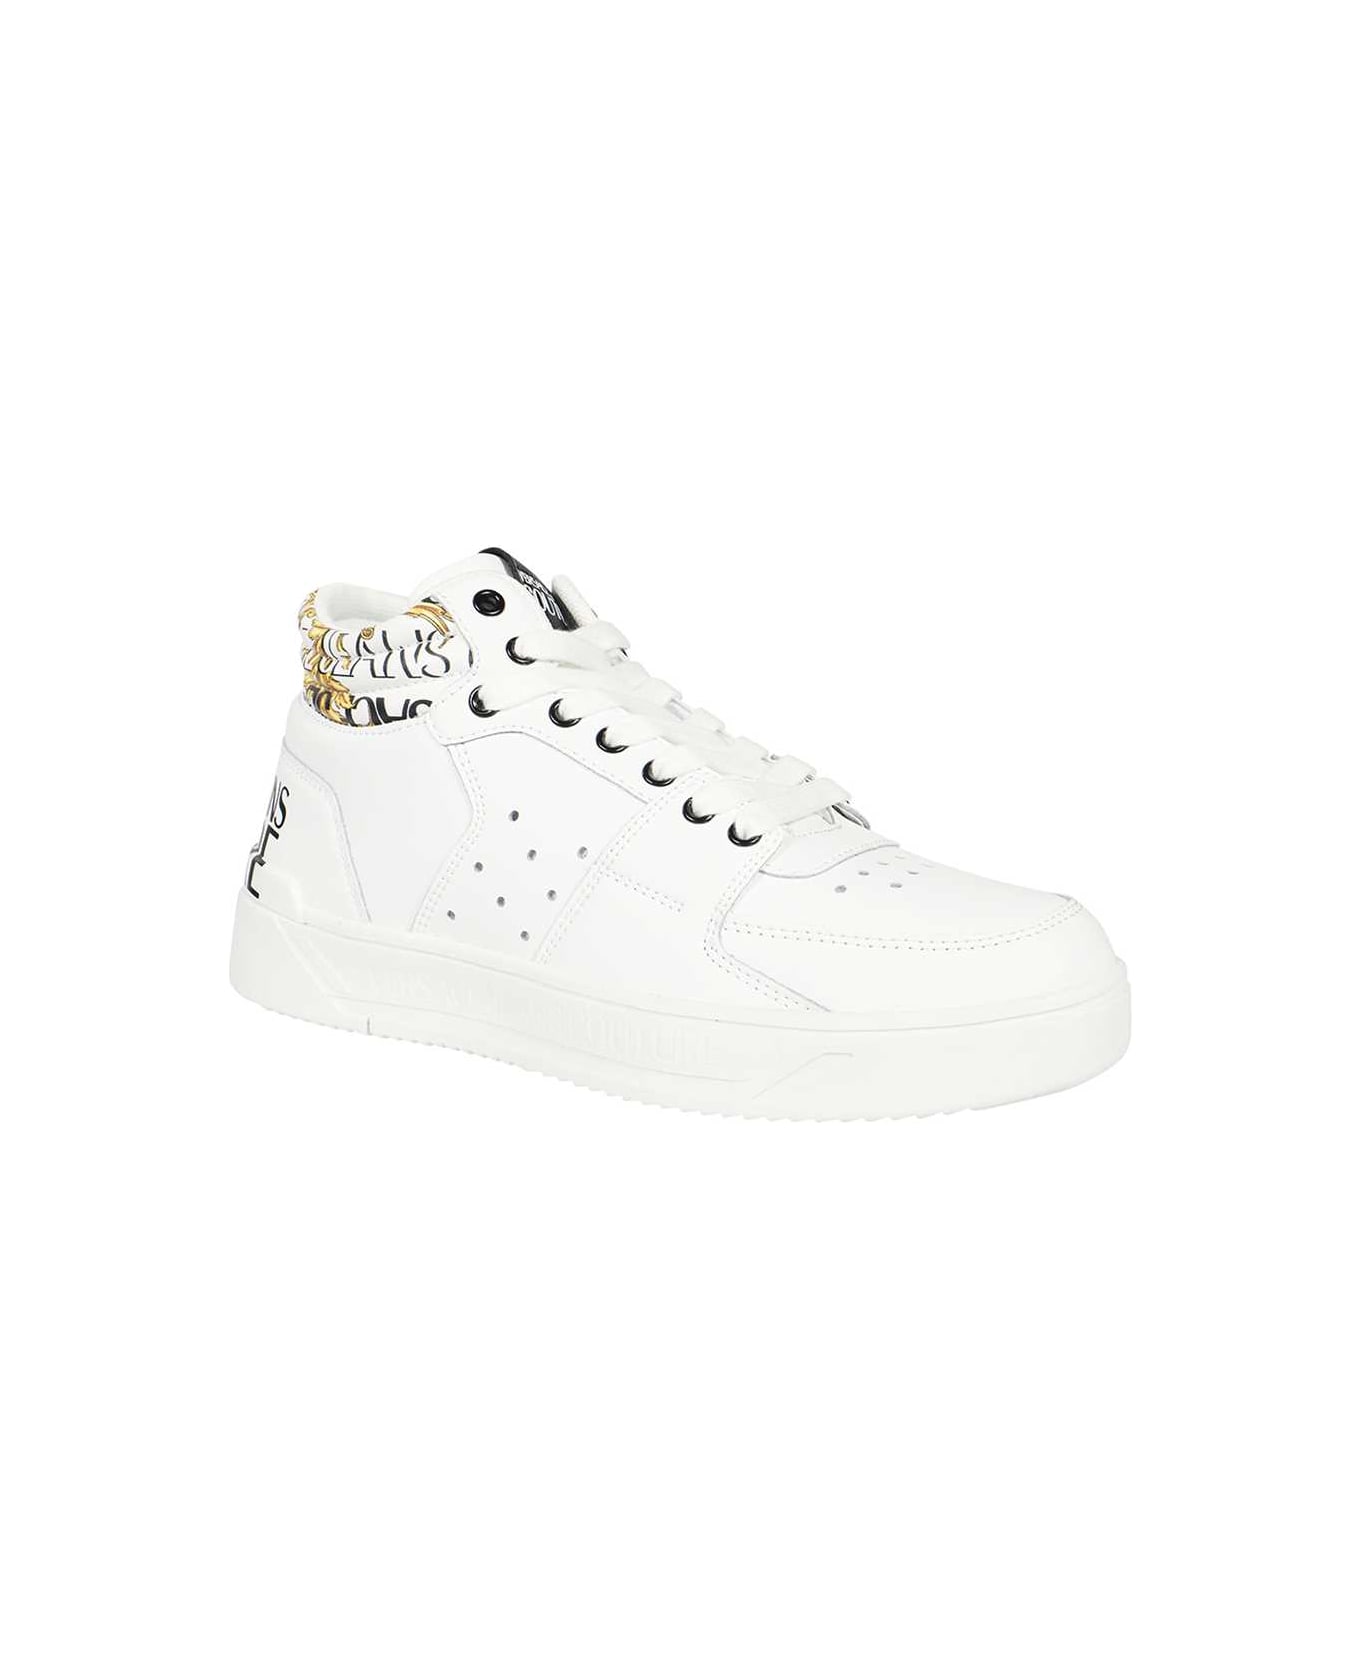 Versace Jeans Couture Logo Detail Leather Sneakers - White スニーカー